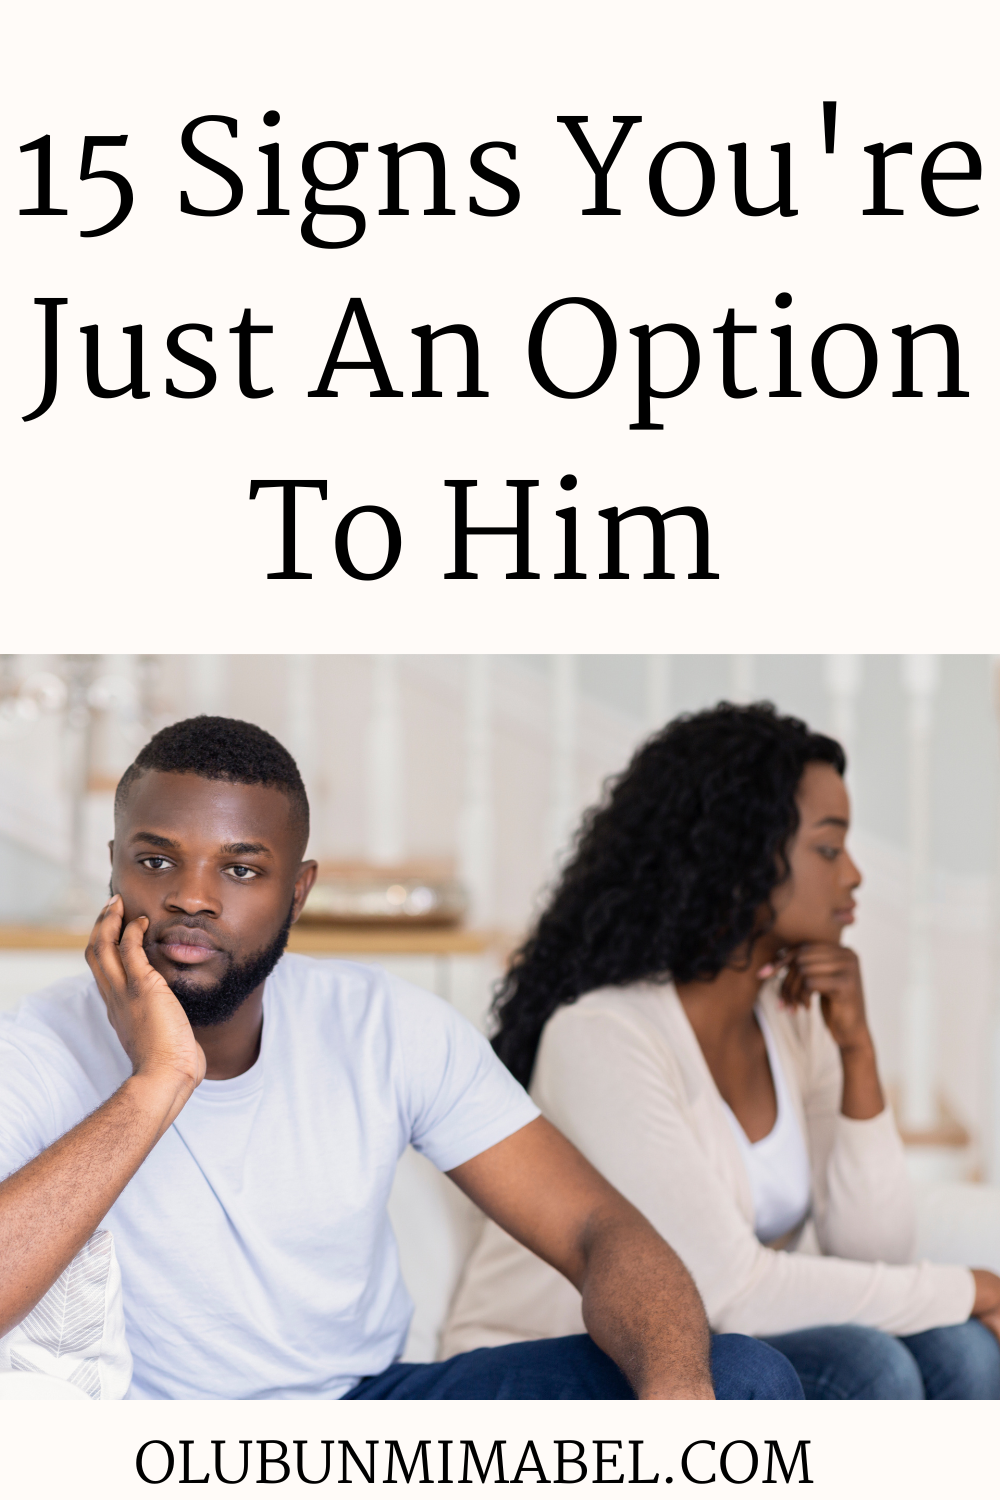 signs you are just an option to him